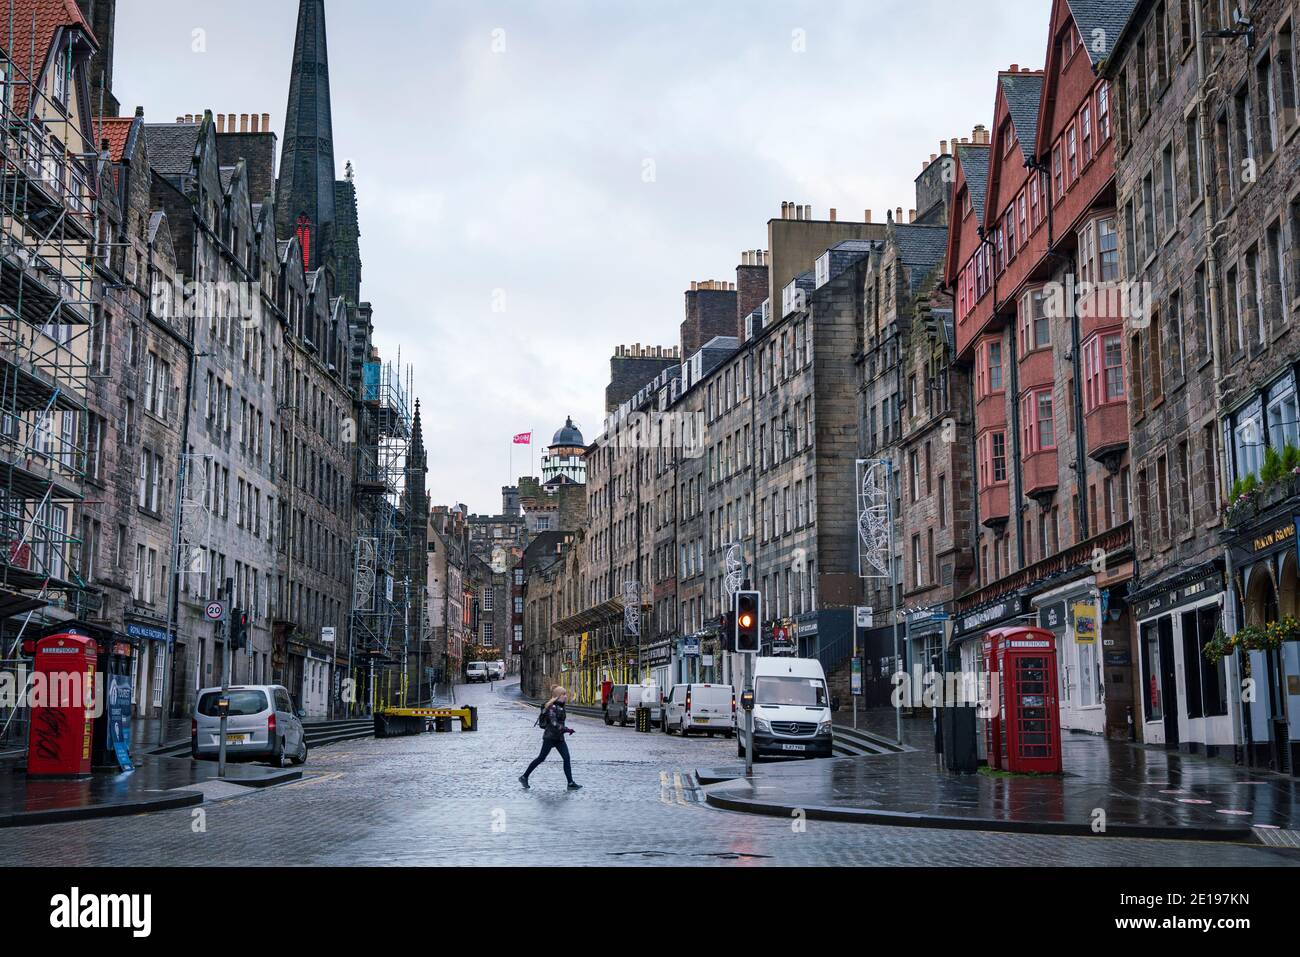 Edinburgh, Scotland, UK. 5 January 2021. Views of a virtually deserted Edinburgh City Centre as Scotland wakes up to the first day of a new strict national lockdown announced by Scottish Government to contain new upsurge in Covid-19 infections. Pic; The Royal Mile in the Old town is almost deserted with no tourists evident.   Iain Masterton/Alamy Live News Stock Photo